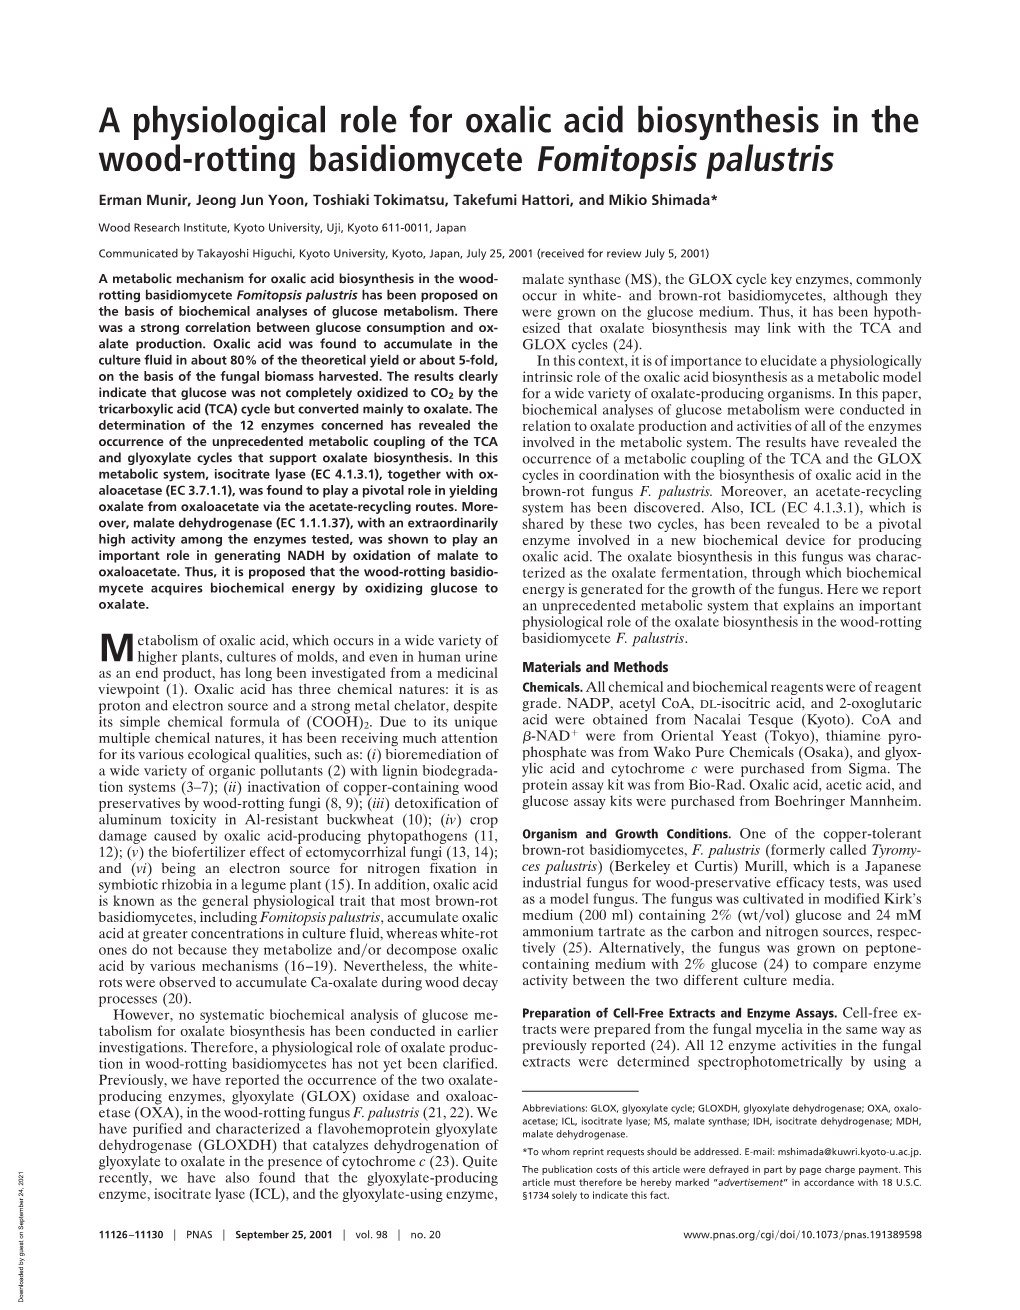 A Physiological Role for Oxalic Acid Biosynthesis in the Wood-Rotting Basidiomycete Fomitopsis Palustris